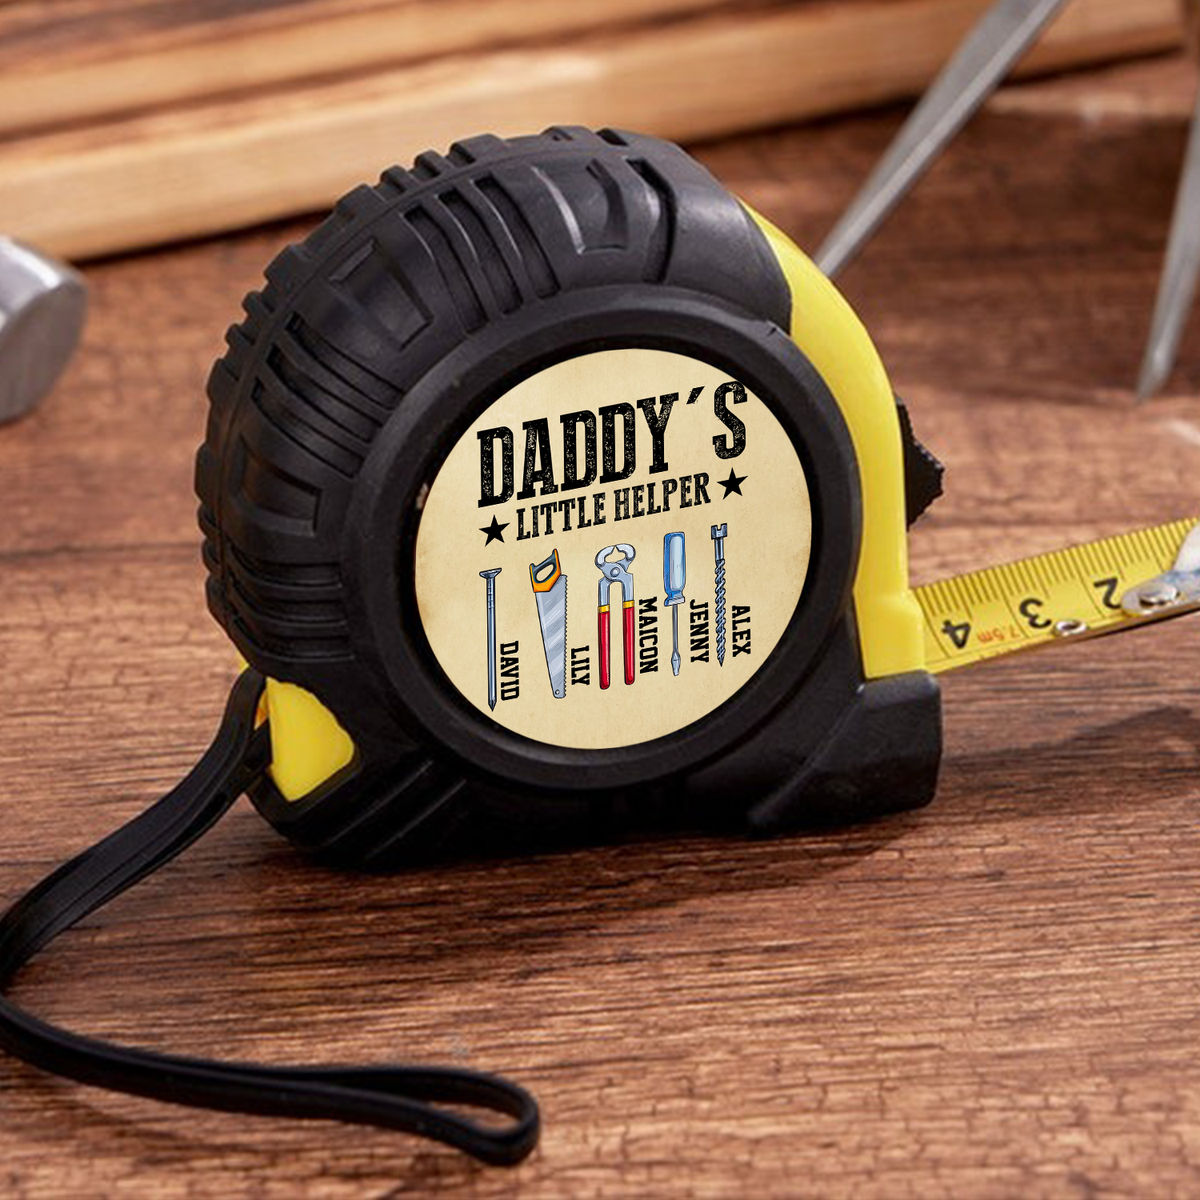 TAPE MEASURE KEYCHAIN Vintage New Old Stock #1 Grandpa Fishing Gift Fathers  Day, Tape Measure Keychain 